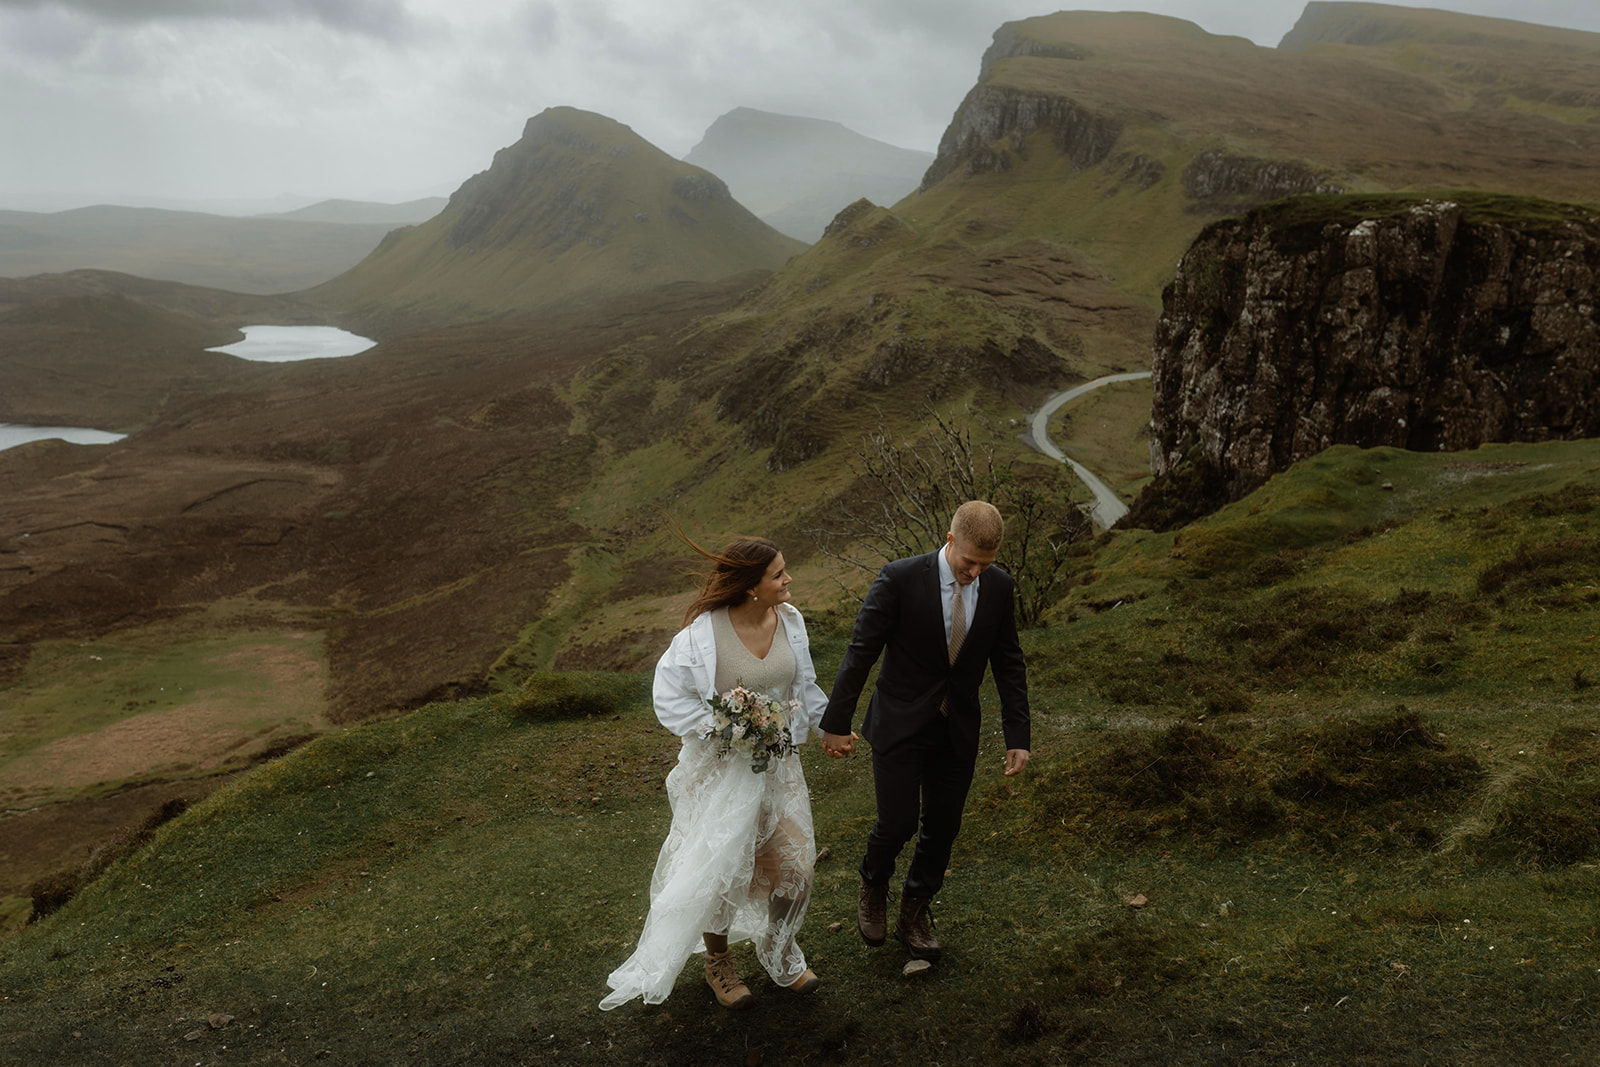 Elopement couples Emma and Matthew walked hand in hand at Quiraing, Isle of Skye.